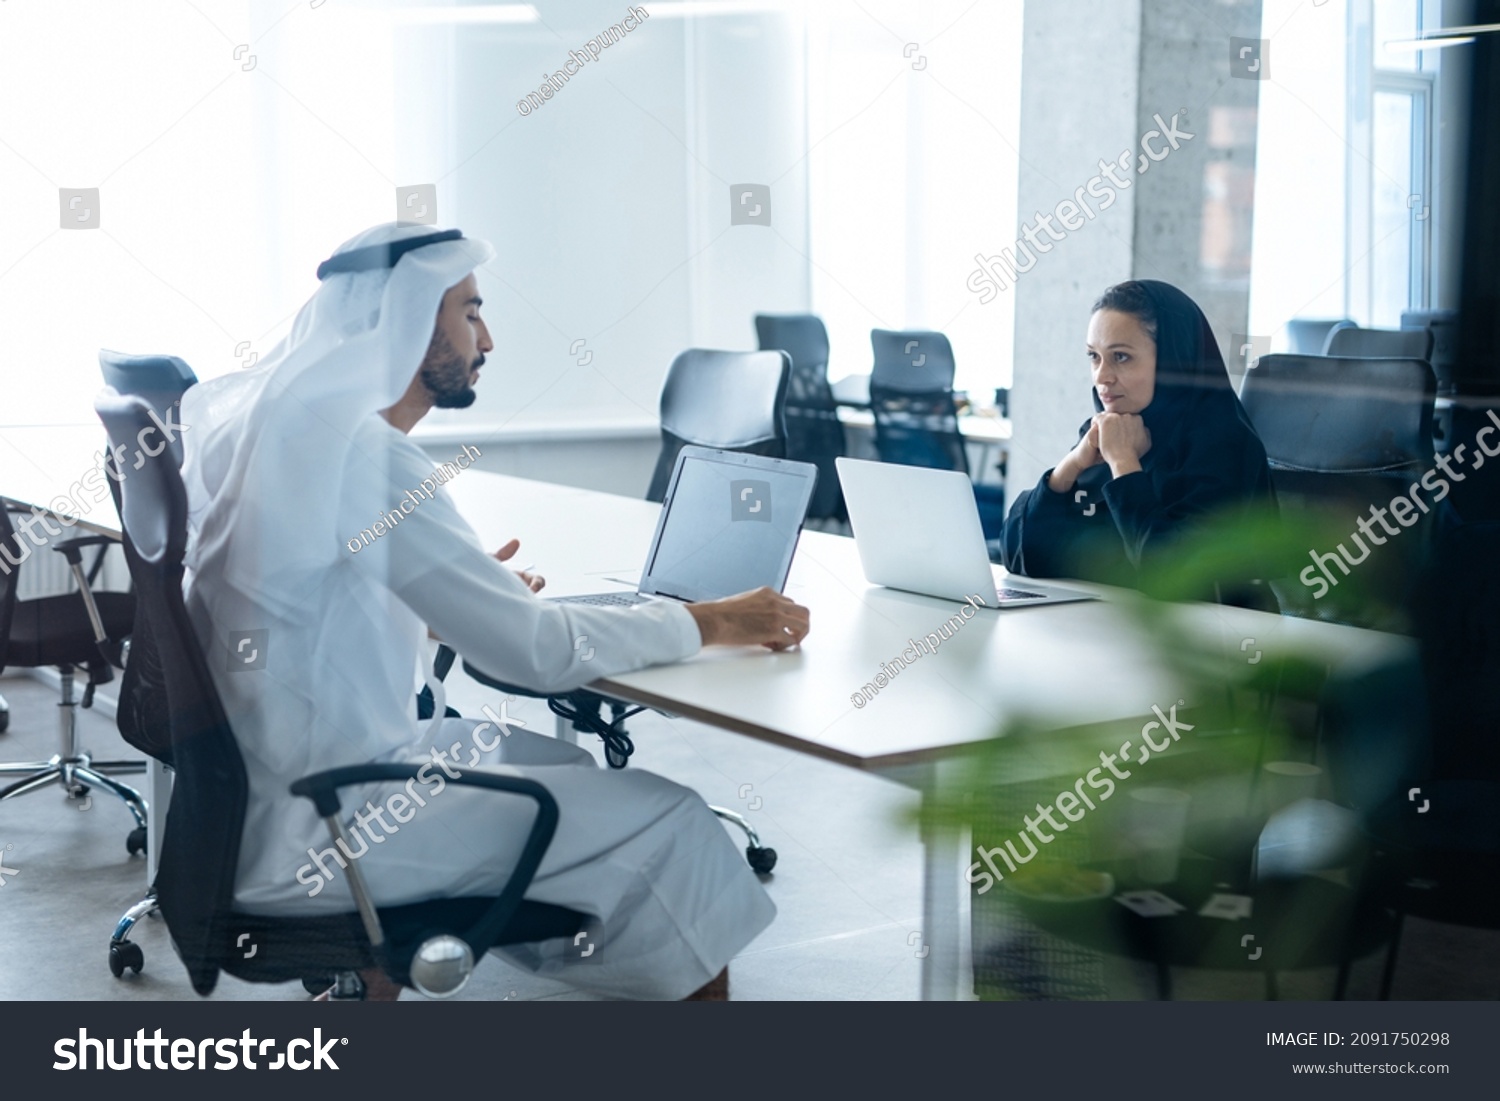 Man and woman with traditional clothes working in a business office of Dubai. Portraits of  successful entrepreneurs businessman and businesswoman in formal emirates outfits. Concept about middle east #2091750298